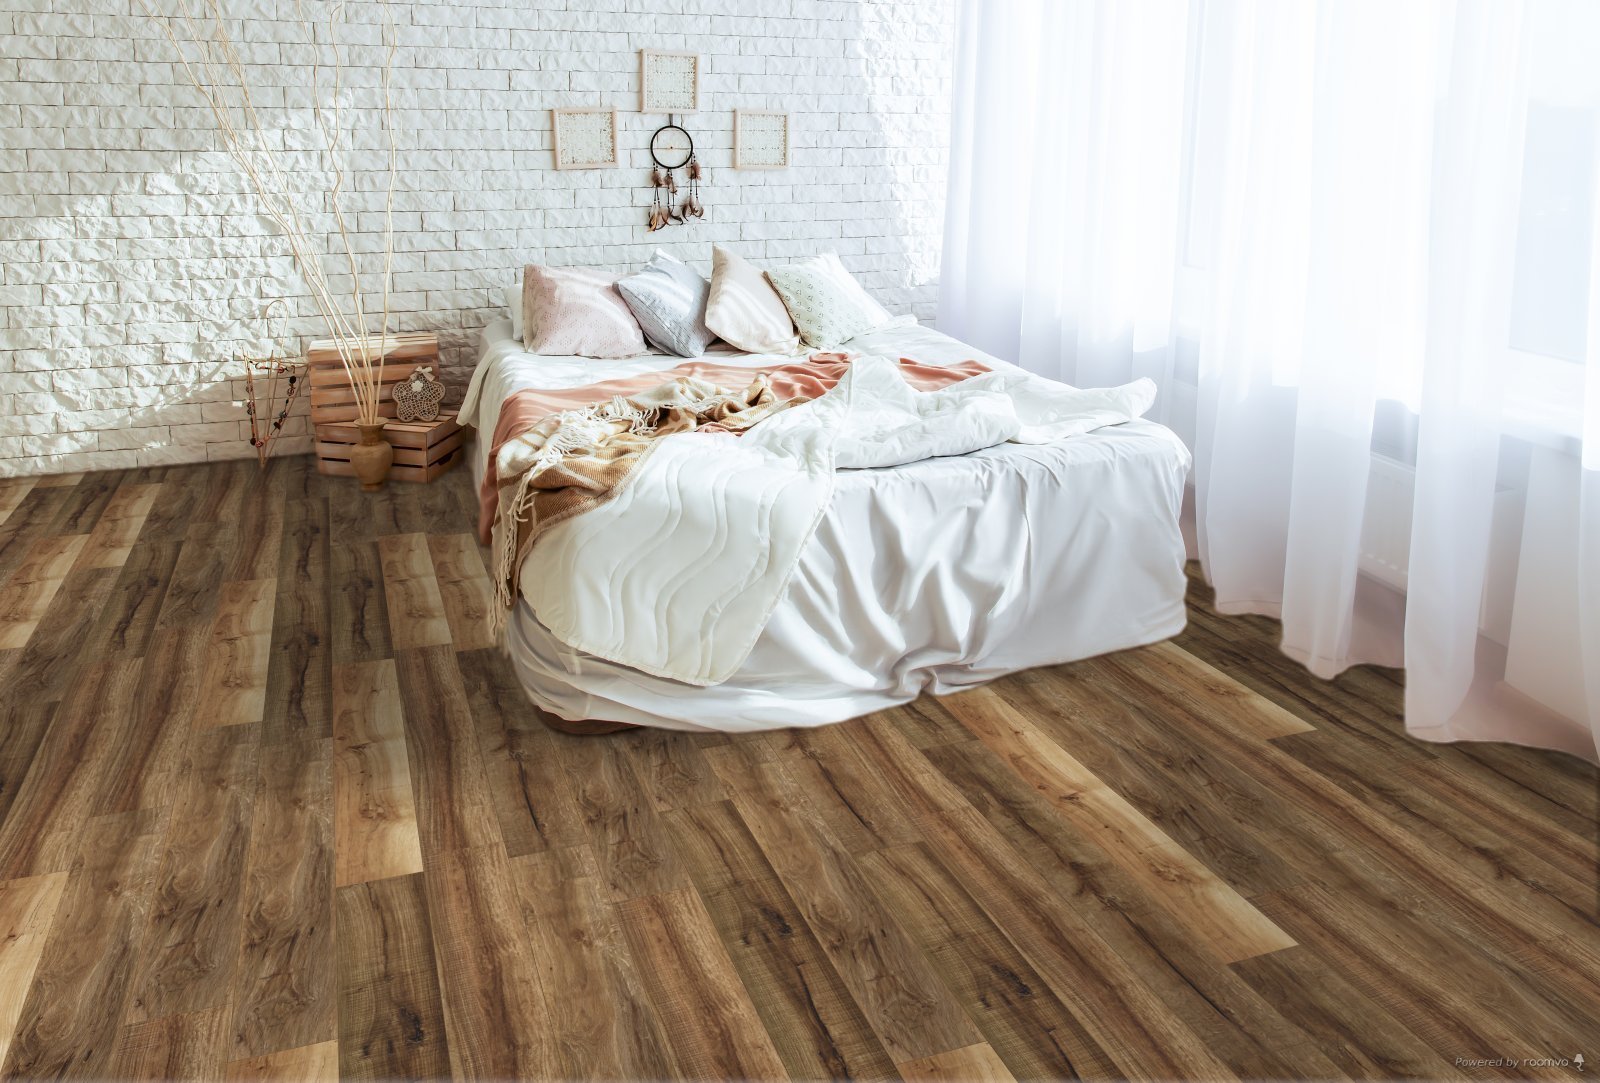 Horizen Flooring presents to you a picture of a quality wide plank Janeiro luxury vinyl plank. NovoCore Premium collection features a wide range of colors & designs that will compliment any interior. Natural wood grain synchronized surface allow for an authentic hardwood look & feel. This collection features a 0.25″ / 6.5 mm overall thickness and a durable 22 mil / 0.55 mm wear layer for residential and commercial applications.